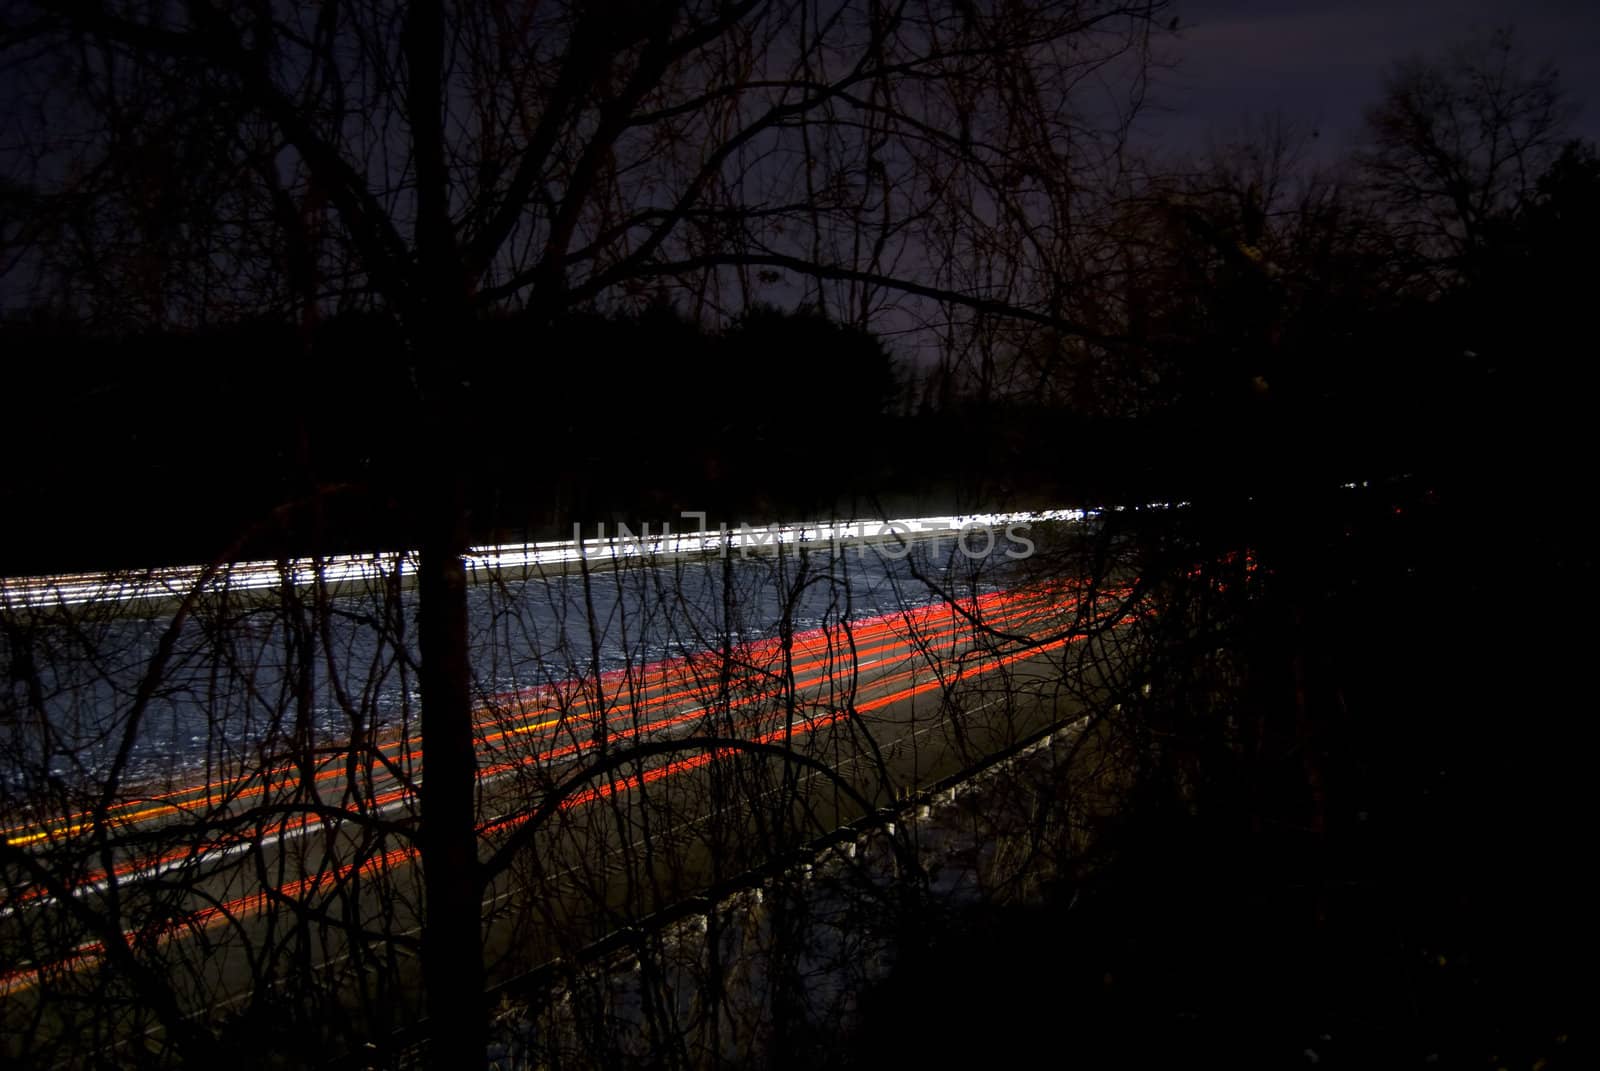 A nighttime highway shot using slow shutterspeed - glowing light trails are visible through the trees.